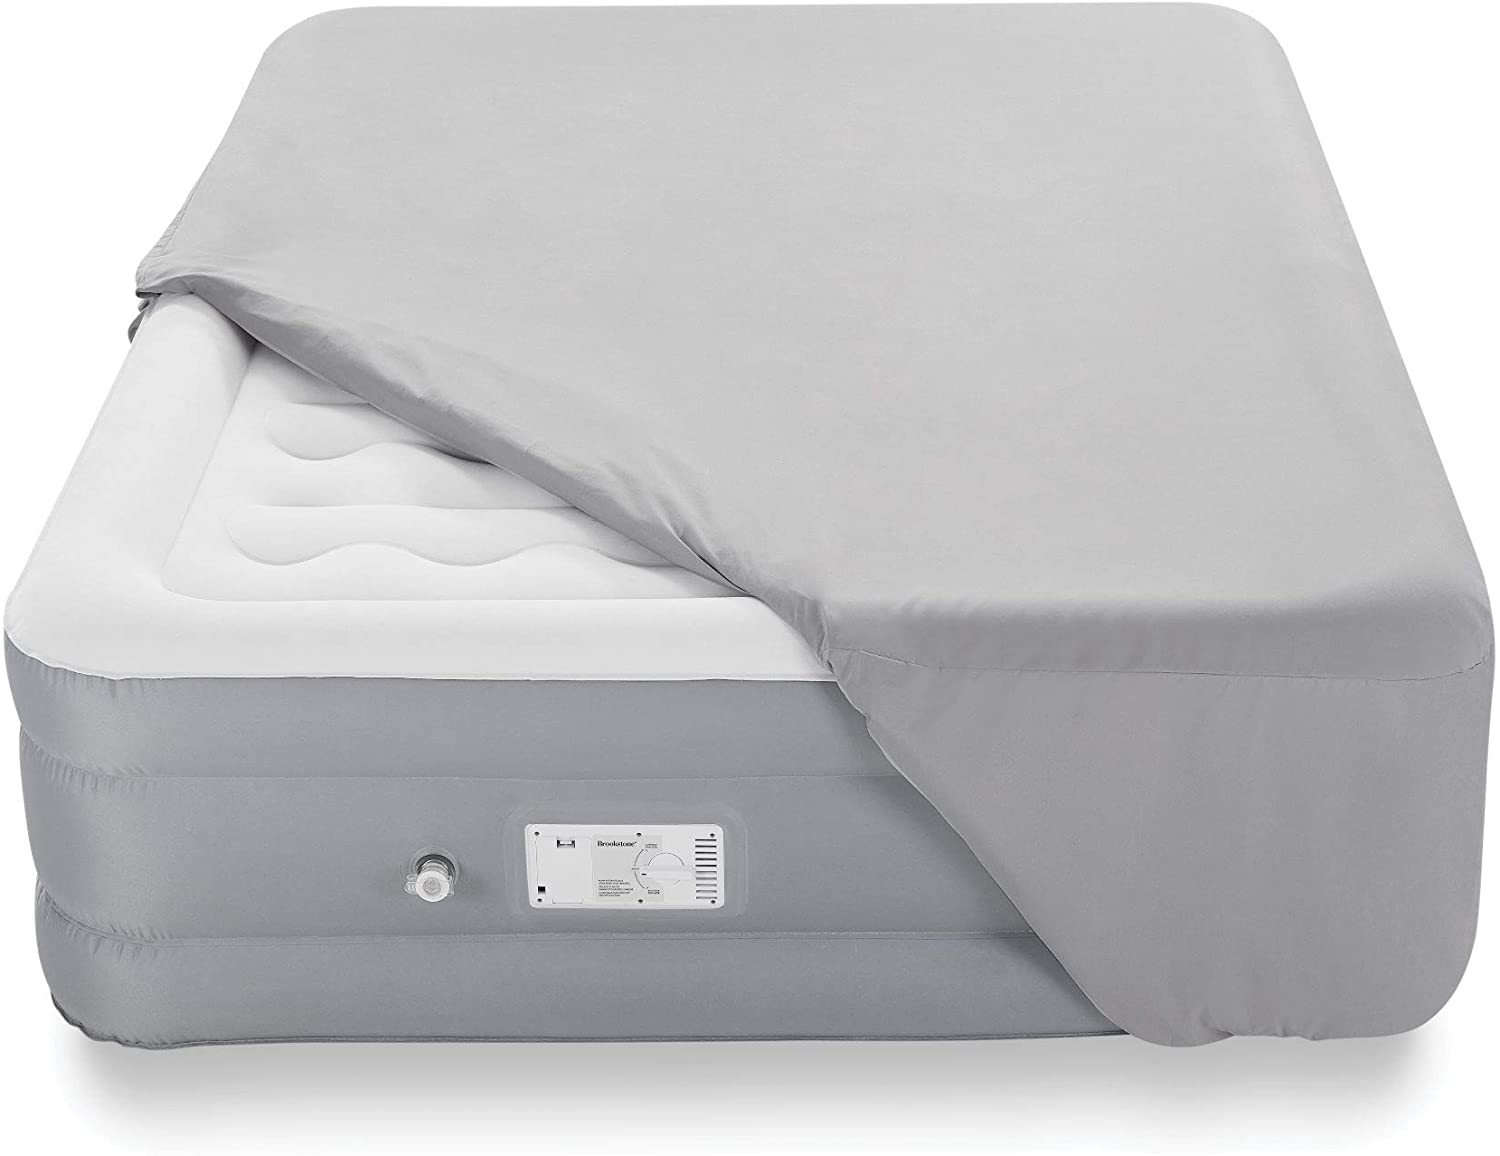 Air bed costs are affected by their height and durability as in this heavy-duty air bed.